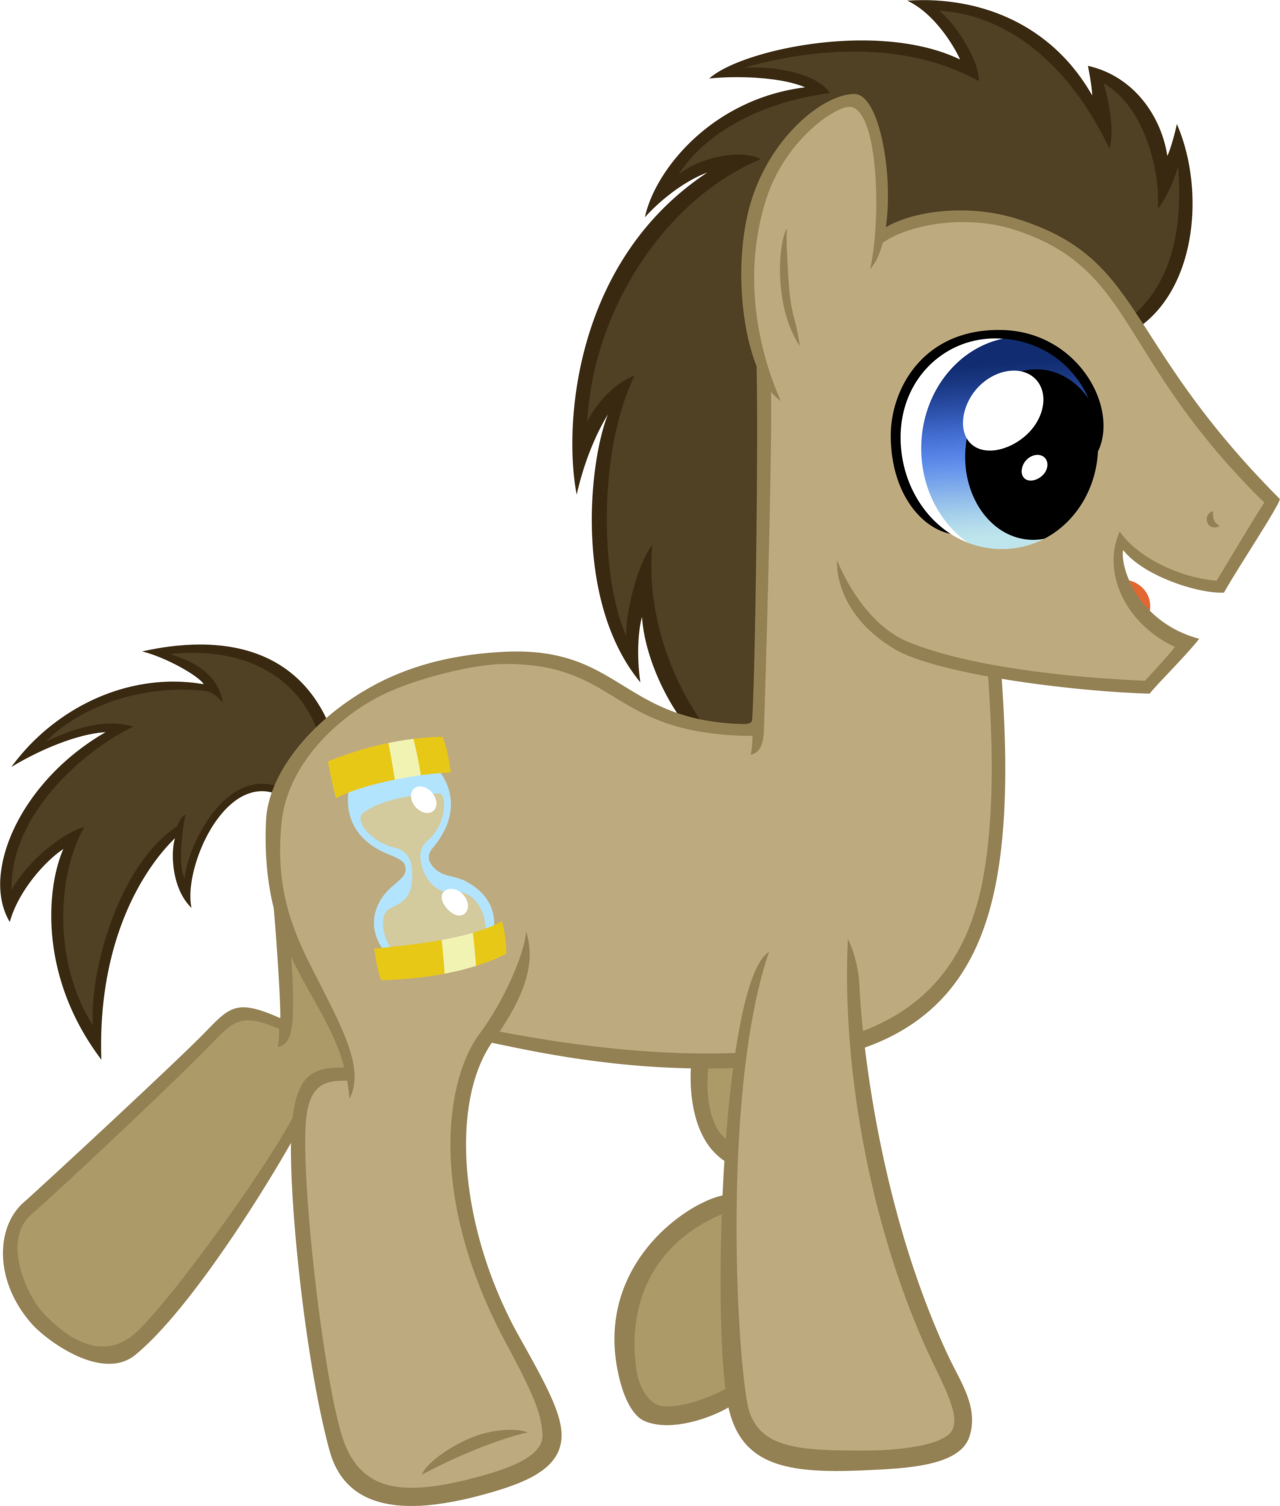 dr__whooves_by_moongazeponies-d45pgam.pn